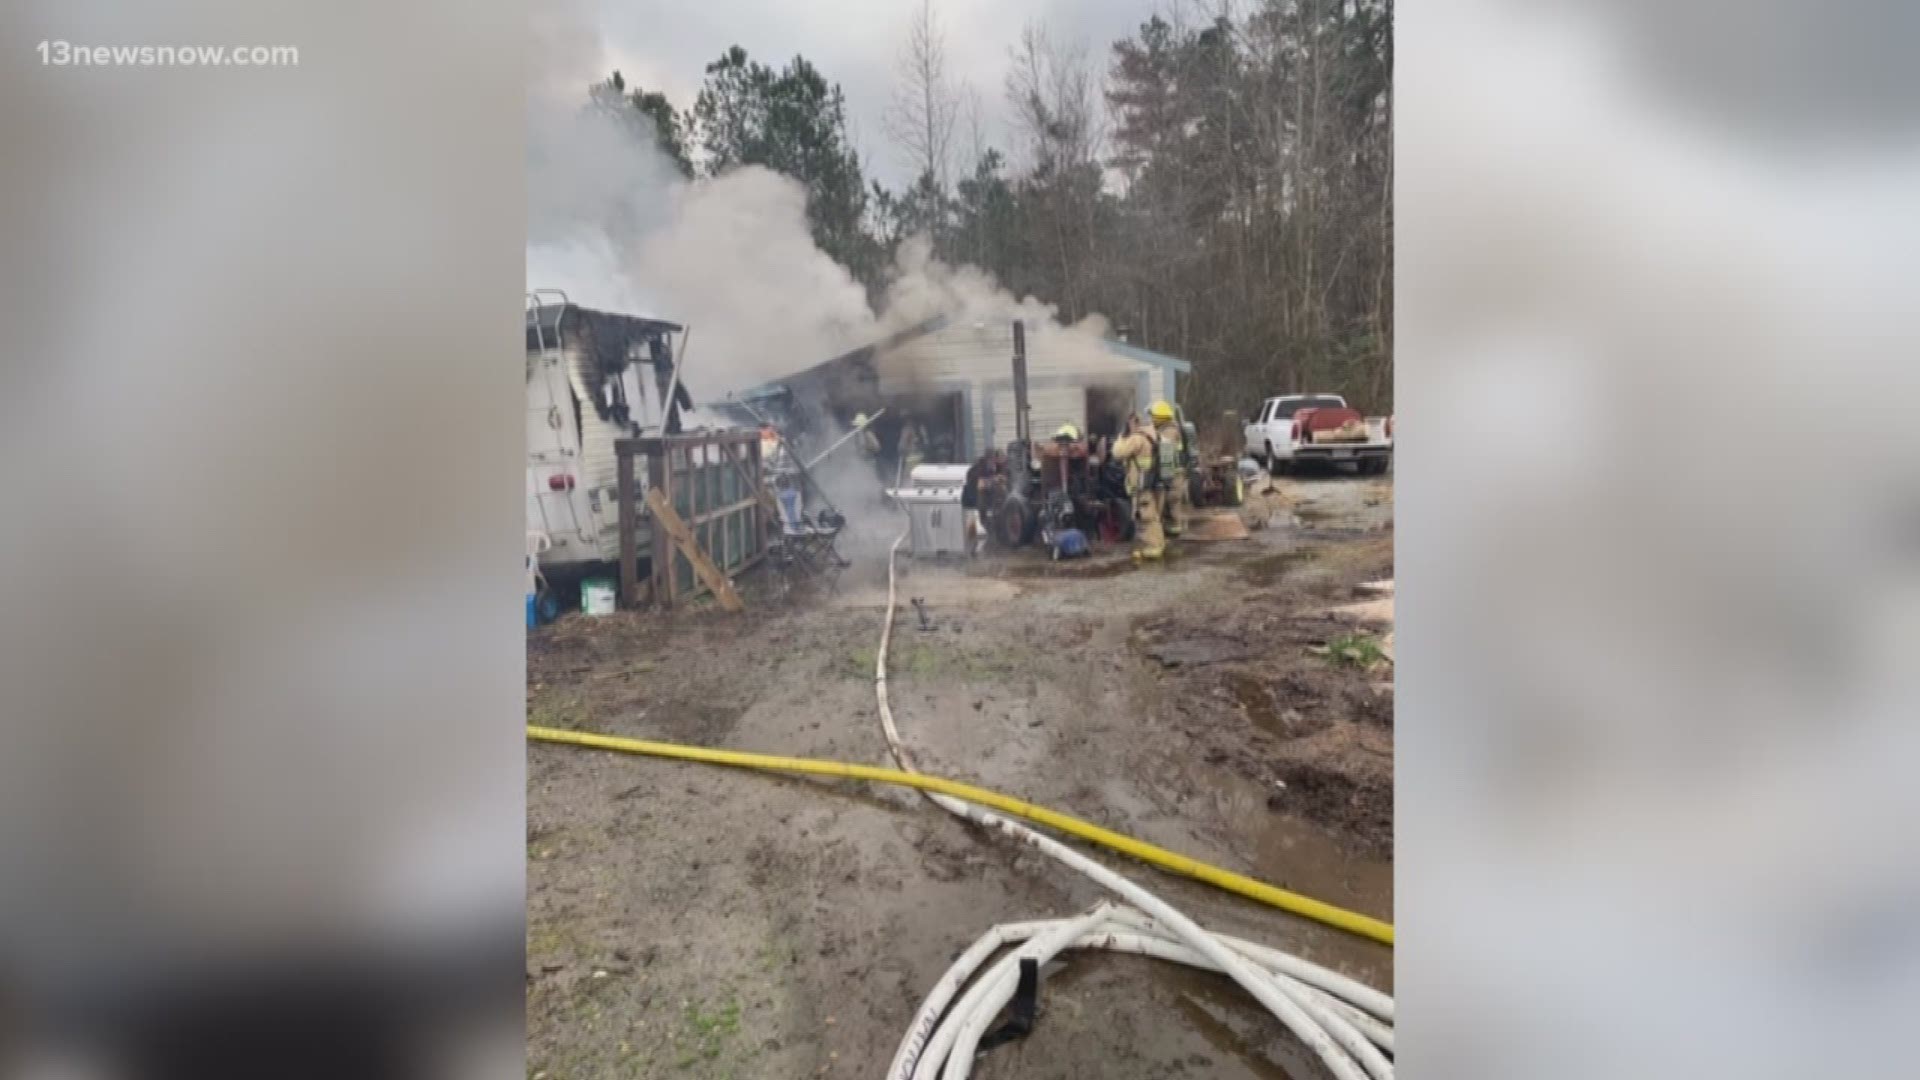 A residential vehicle was consumed by flames on Freeman Mill Road in Suffolk. Investigators are looking into the cause.